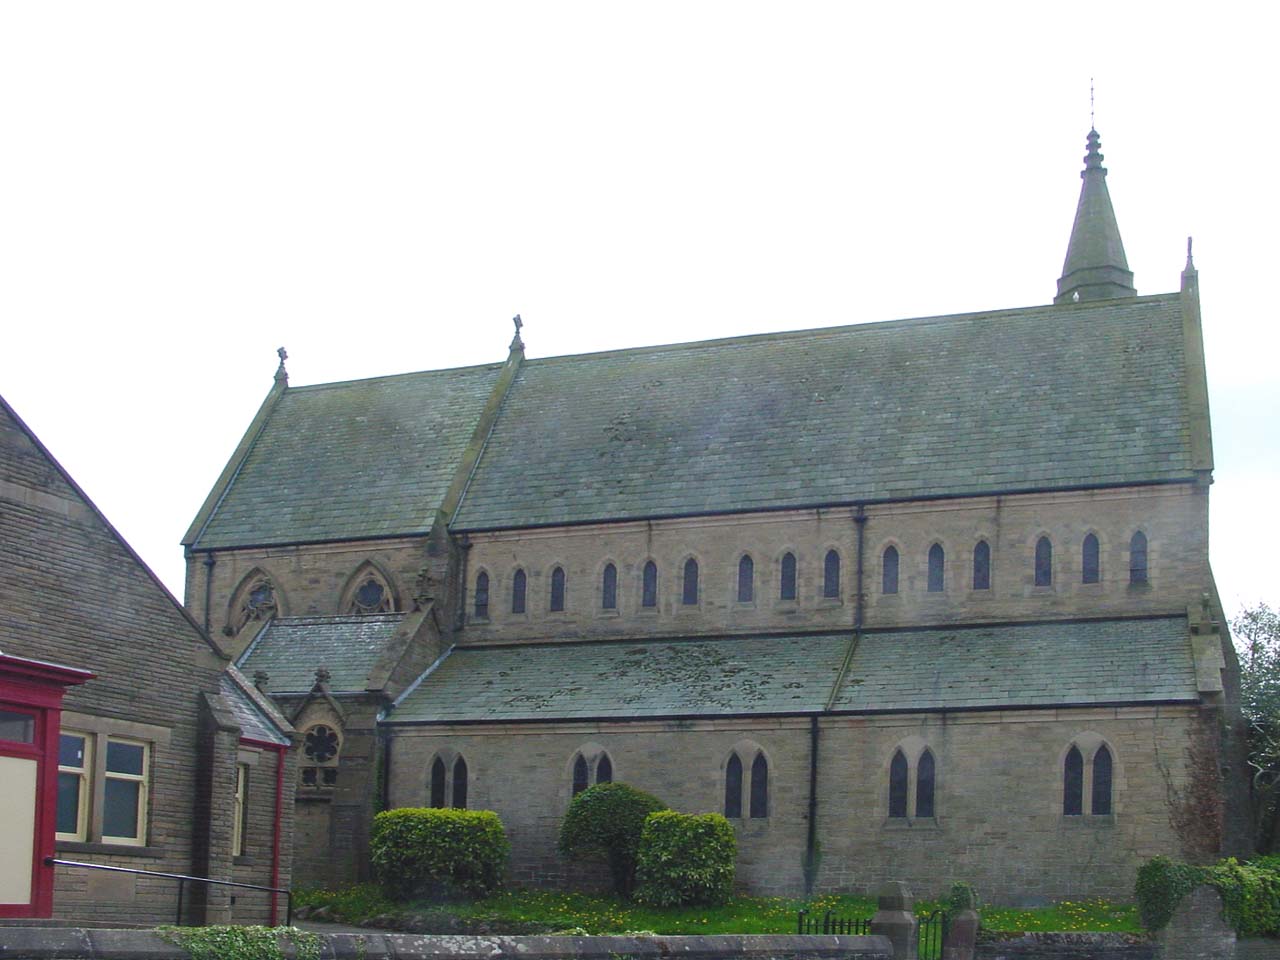 The Roman Catholic Church of St Mary of the Angels